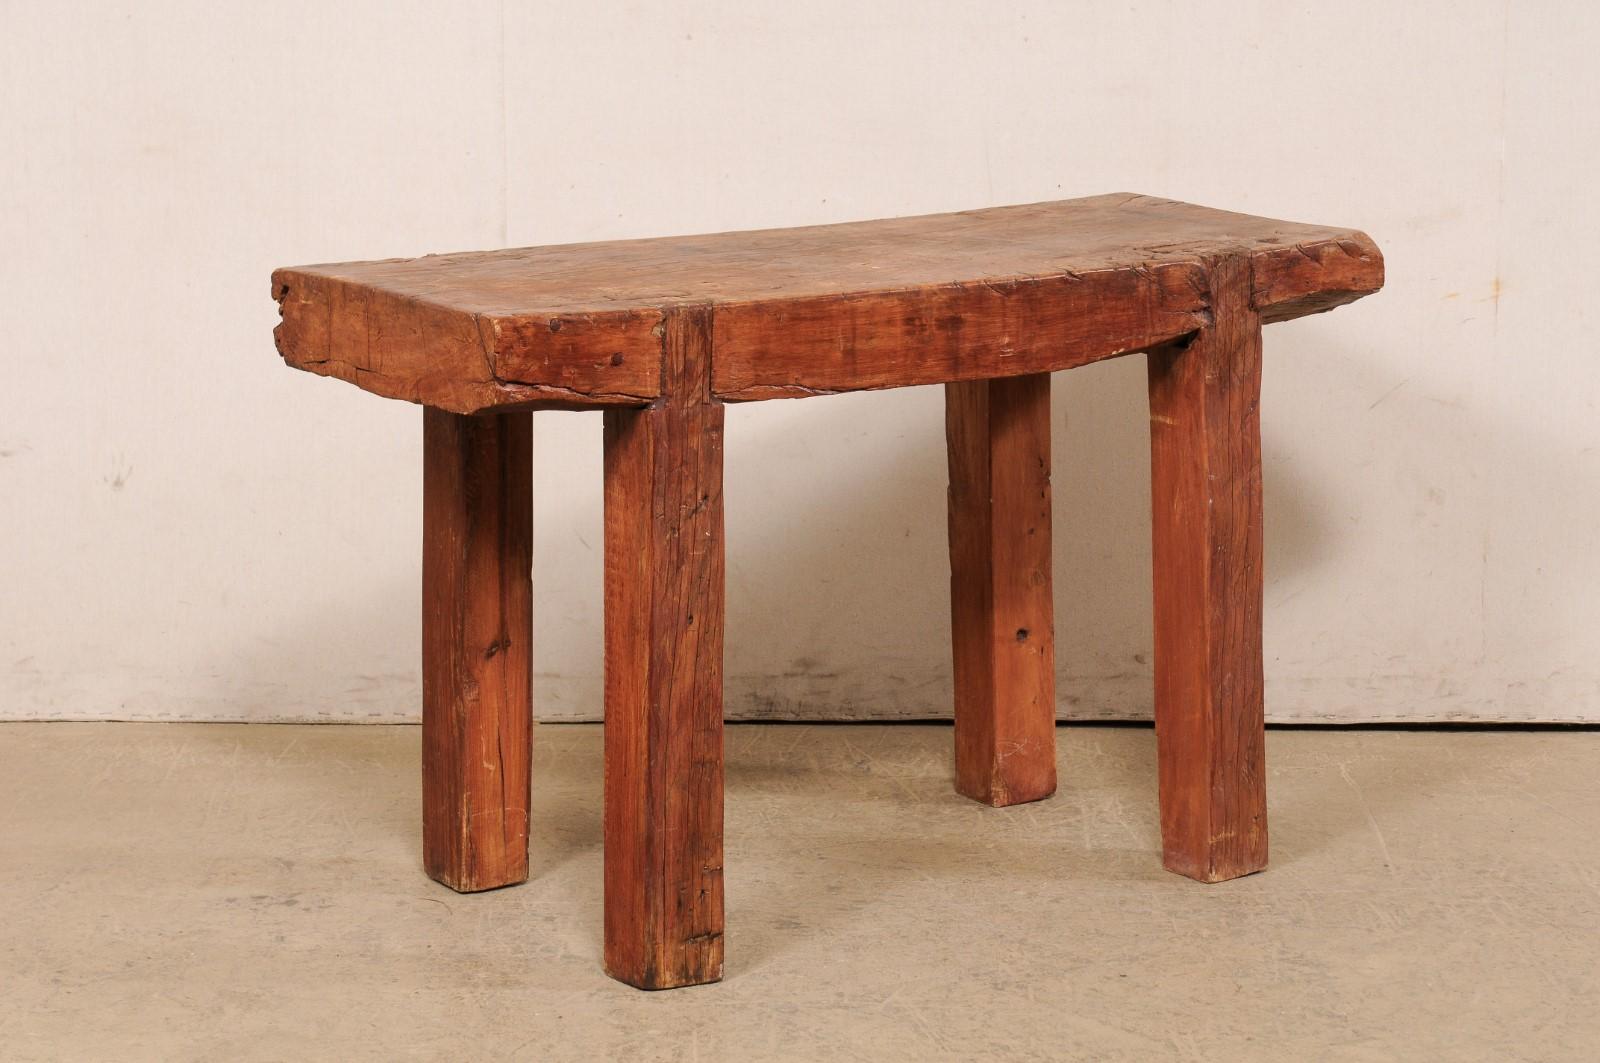 Beautifully Rustic Thick Chopping Block Top Table Would Be a Great Sink Base 2